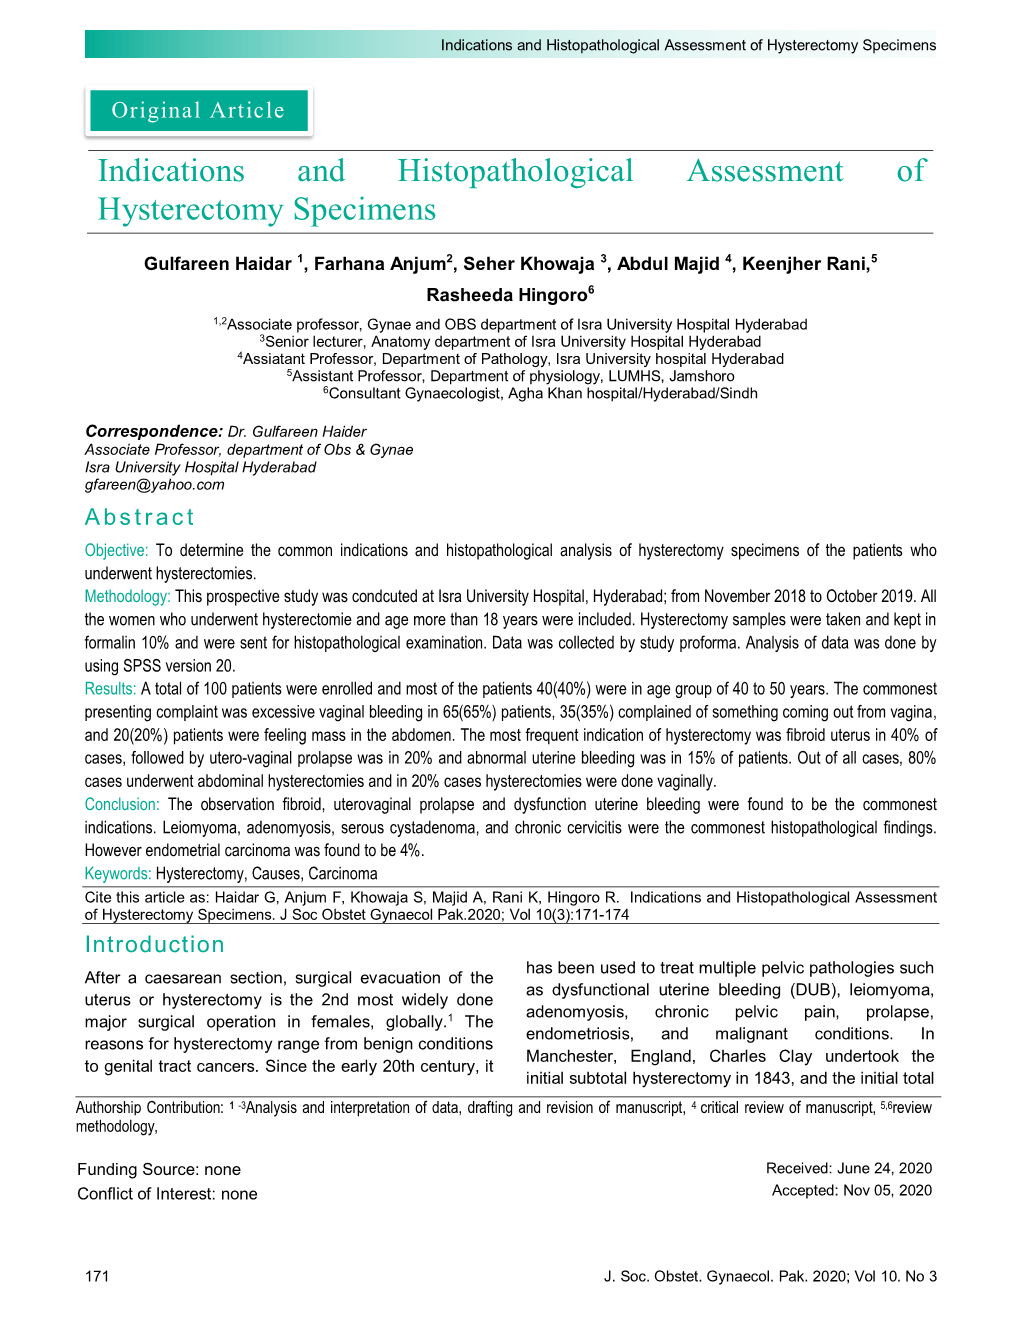 Indications and Histopathological Assessment of Hysterectomy Specimens